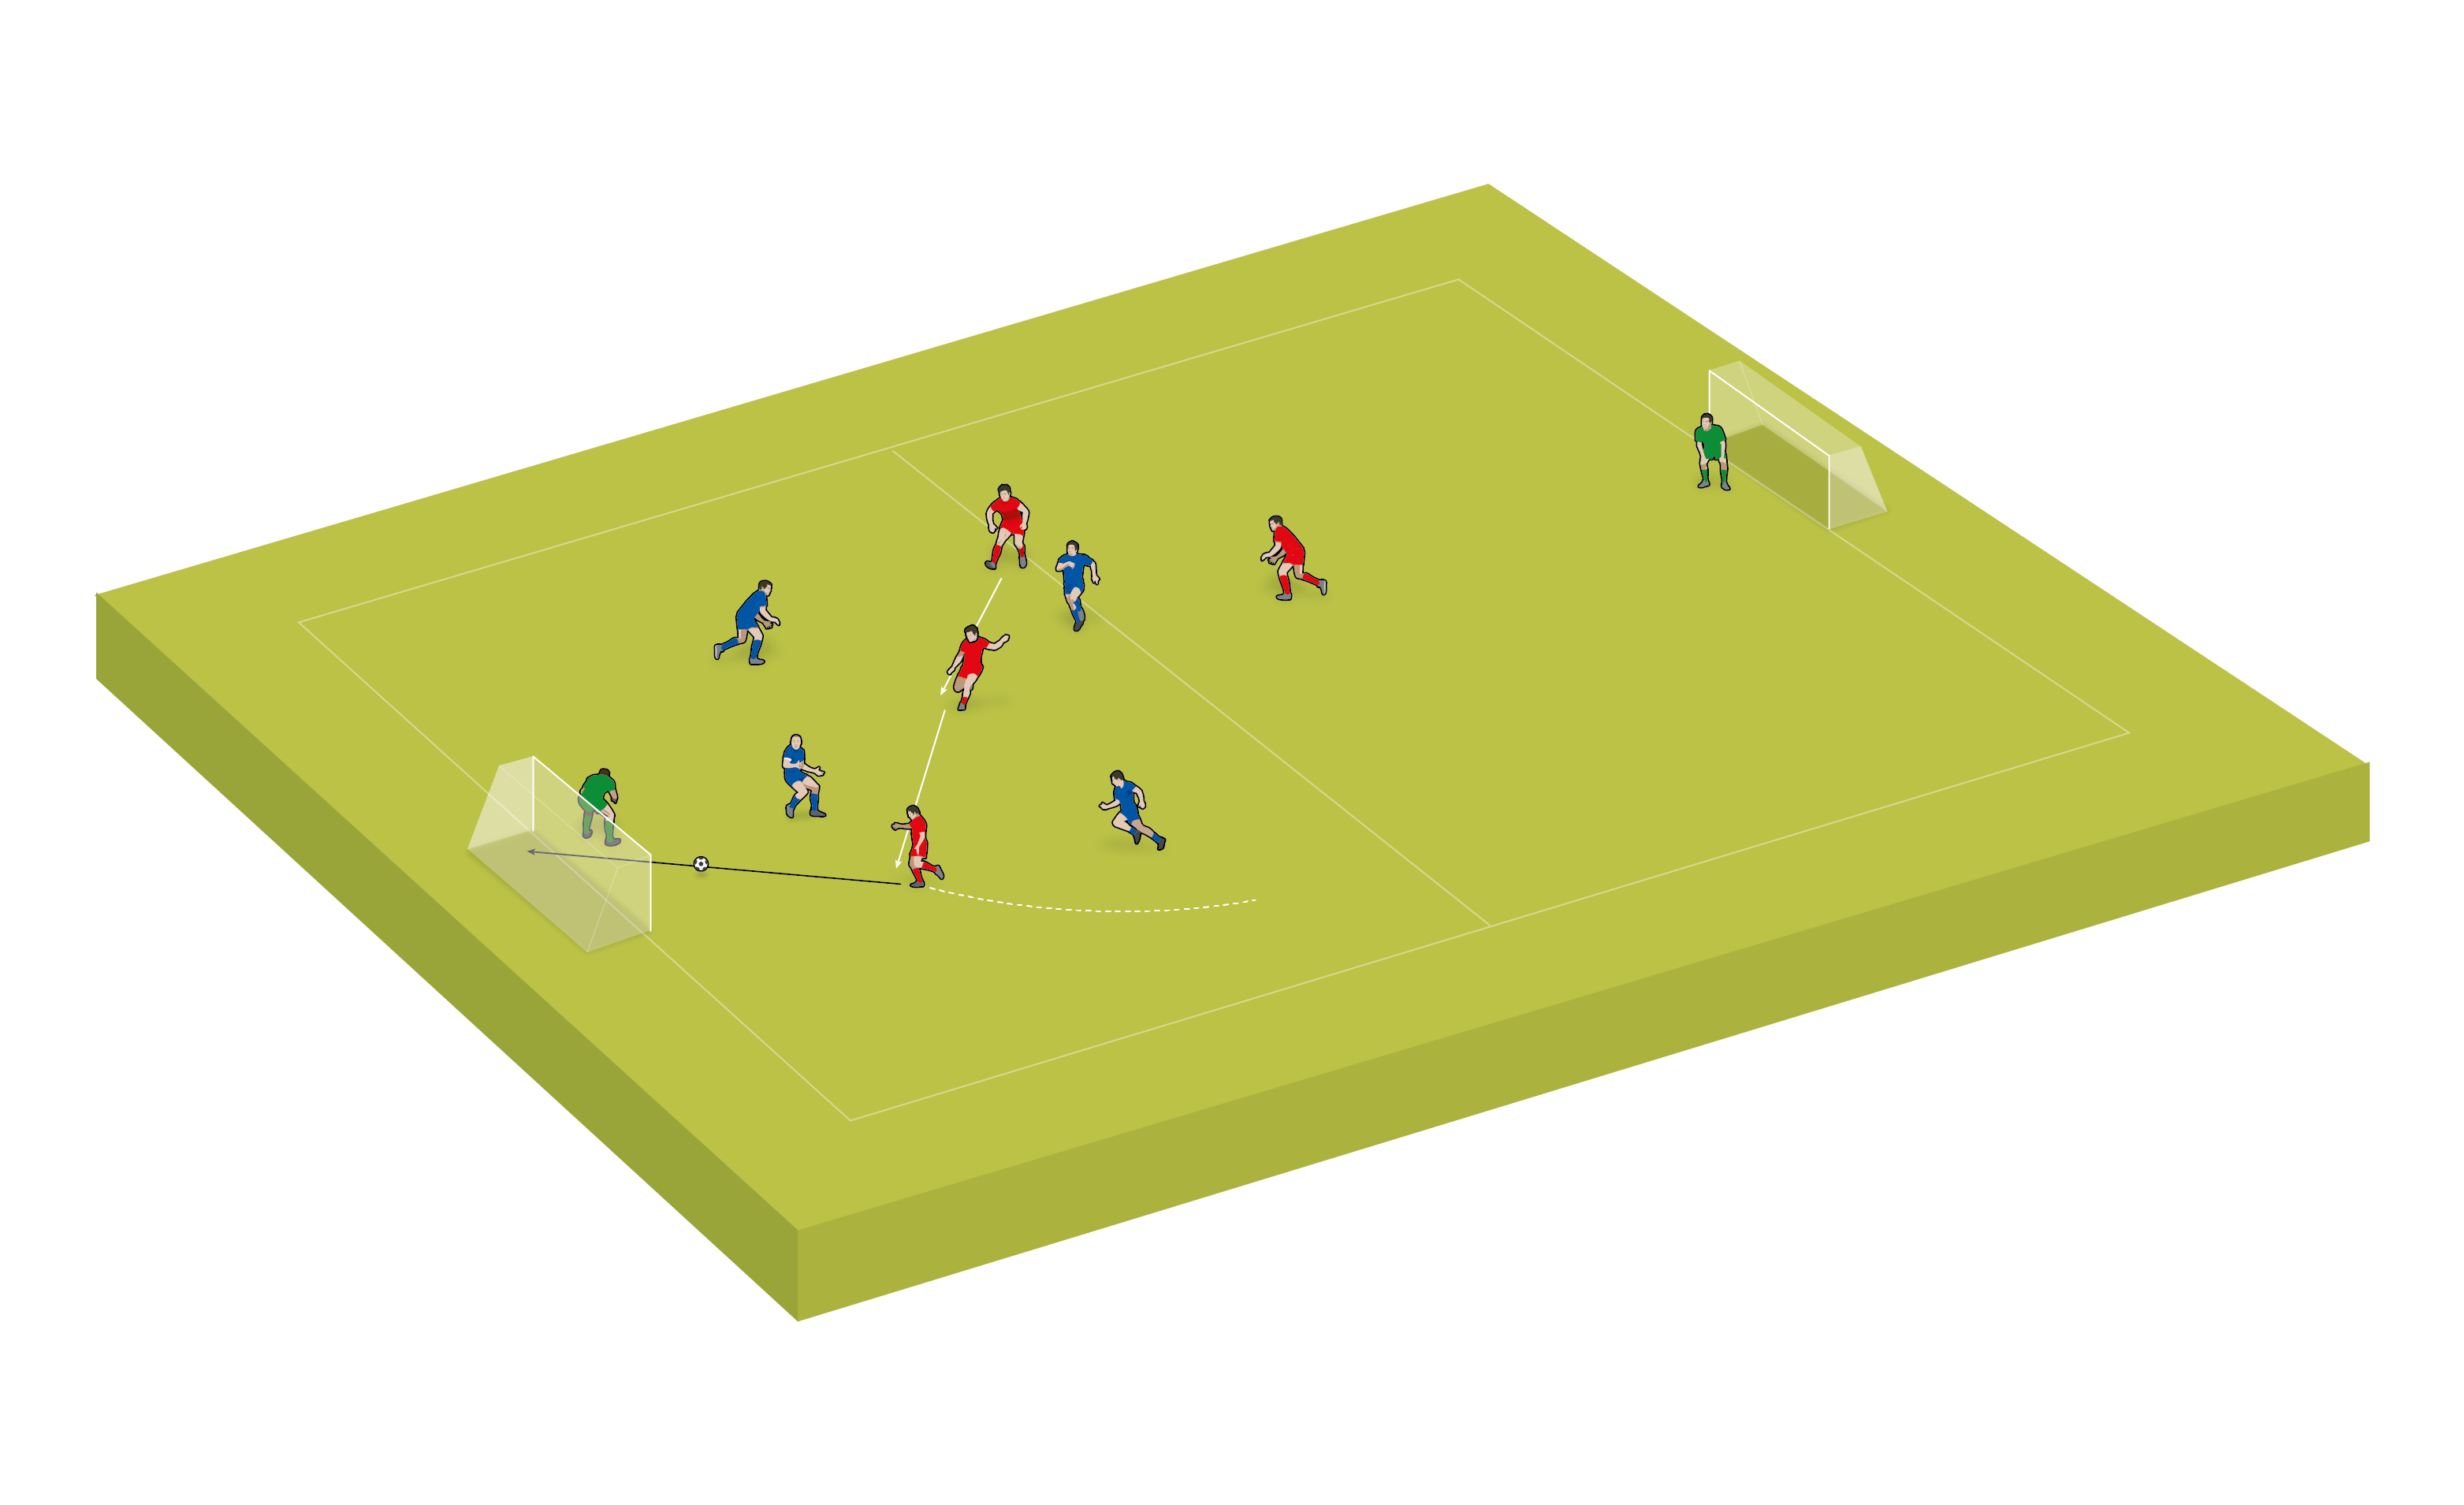 Small-sided game: Individual possession